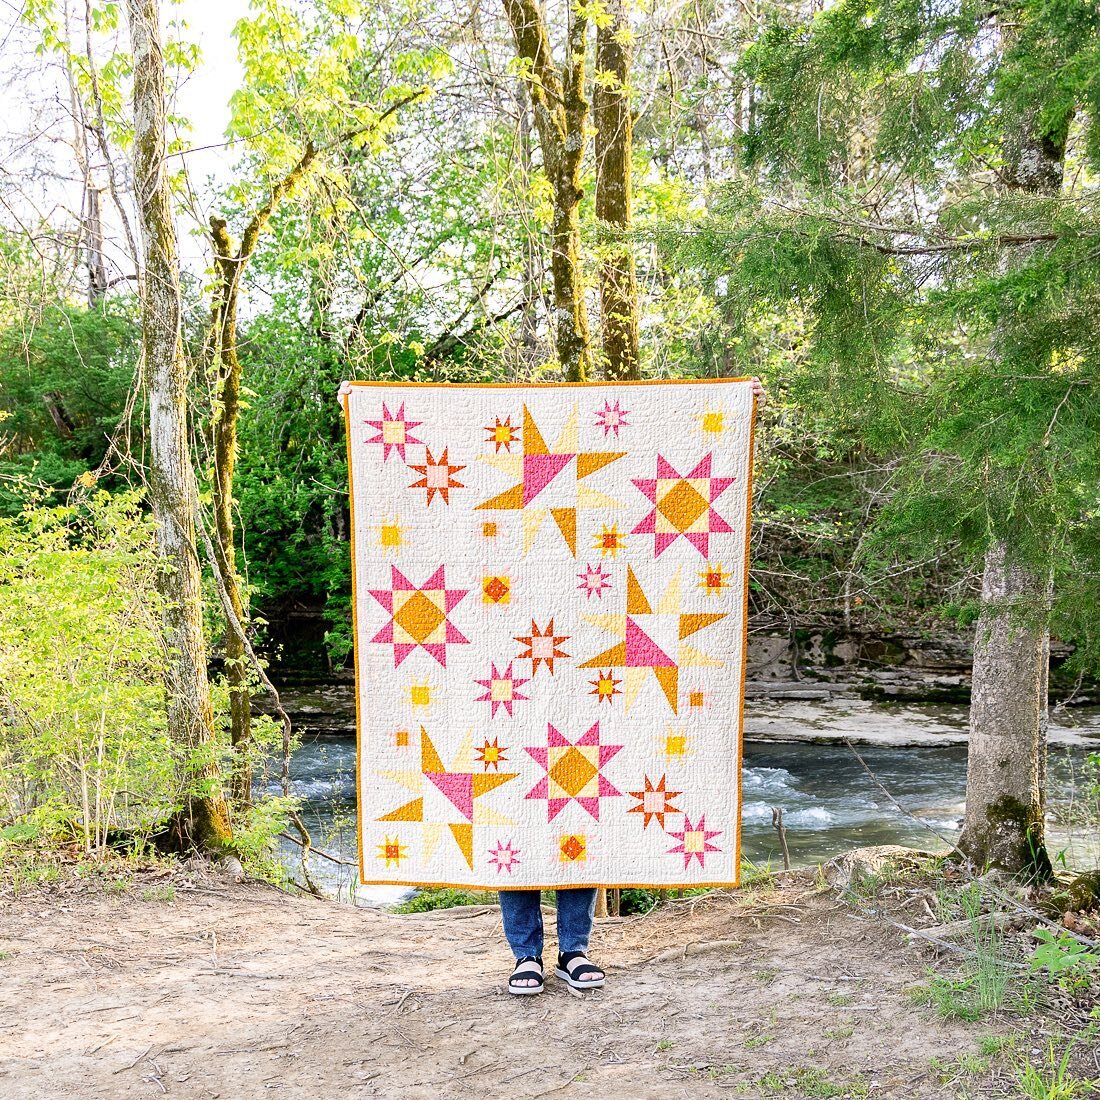 Stardust Shine has 3 size options, including this smaller lap version. The fun thing is the smaller quilts are part of the bigger design, so if you change your mind and want to make your top bigger, you still can! 

Link to the pattern in my profile.